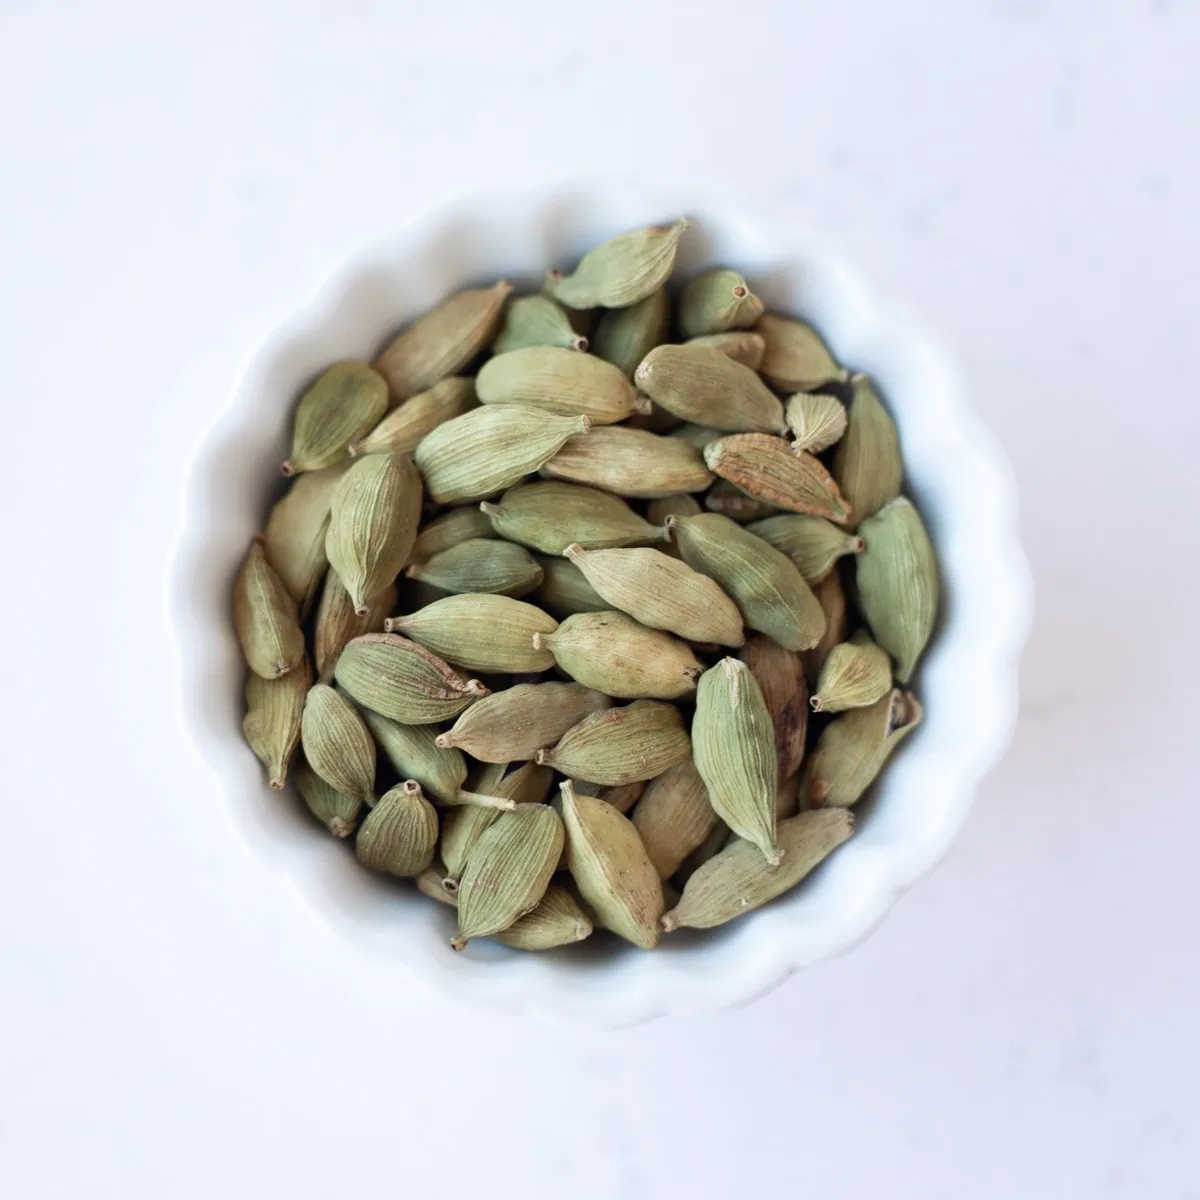 Green cardamom in a small white bowl.